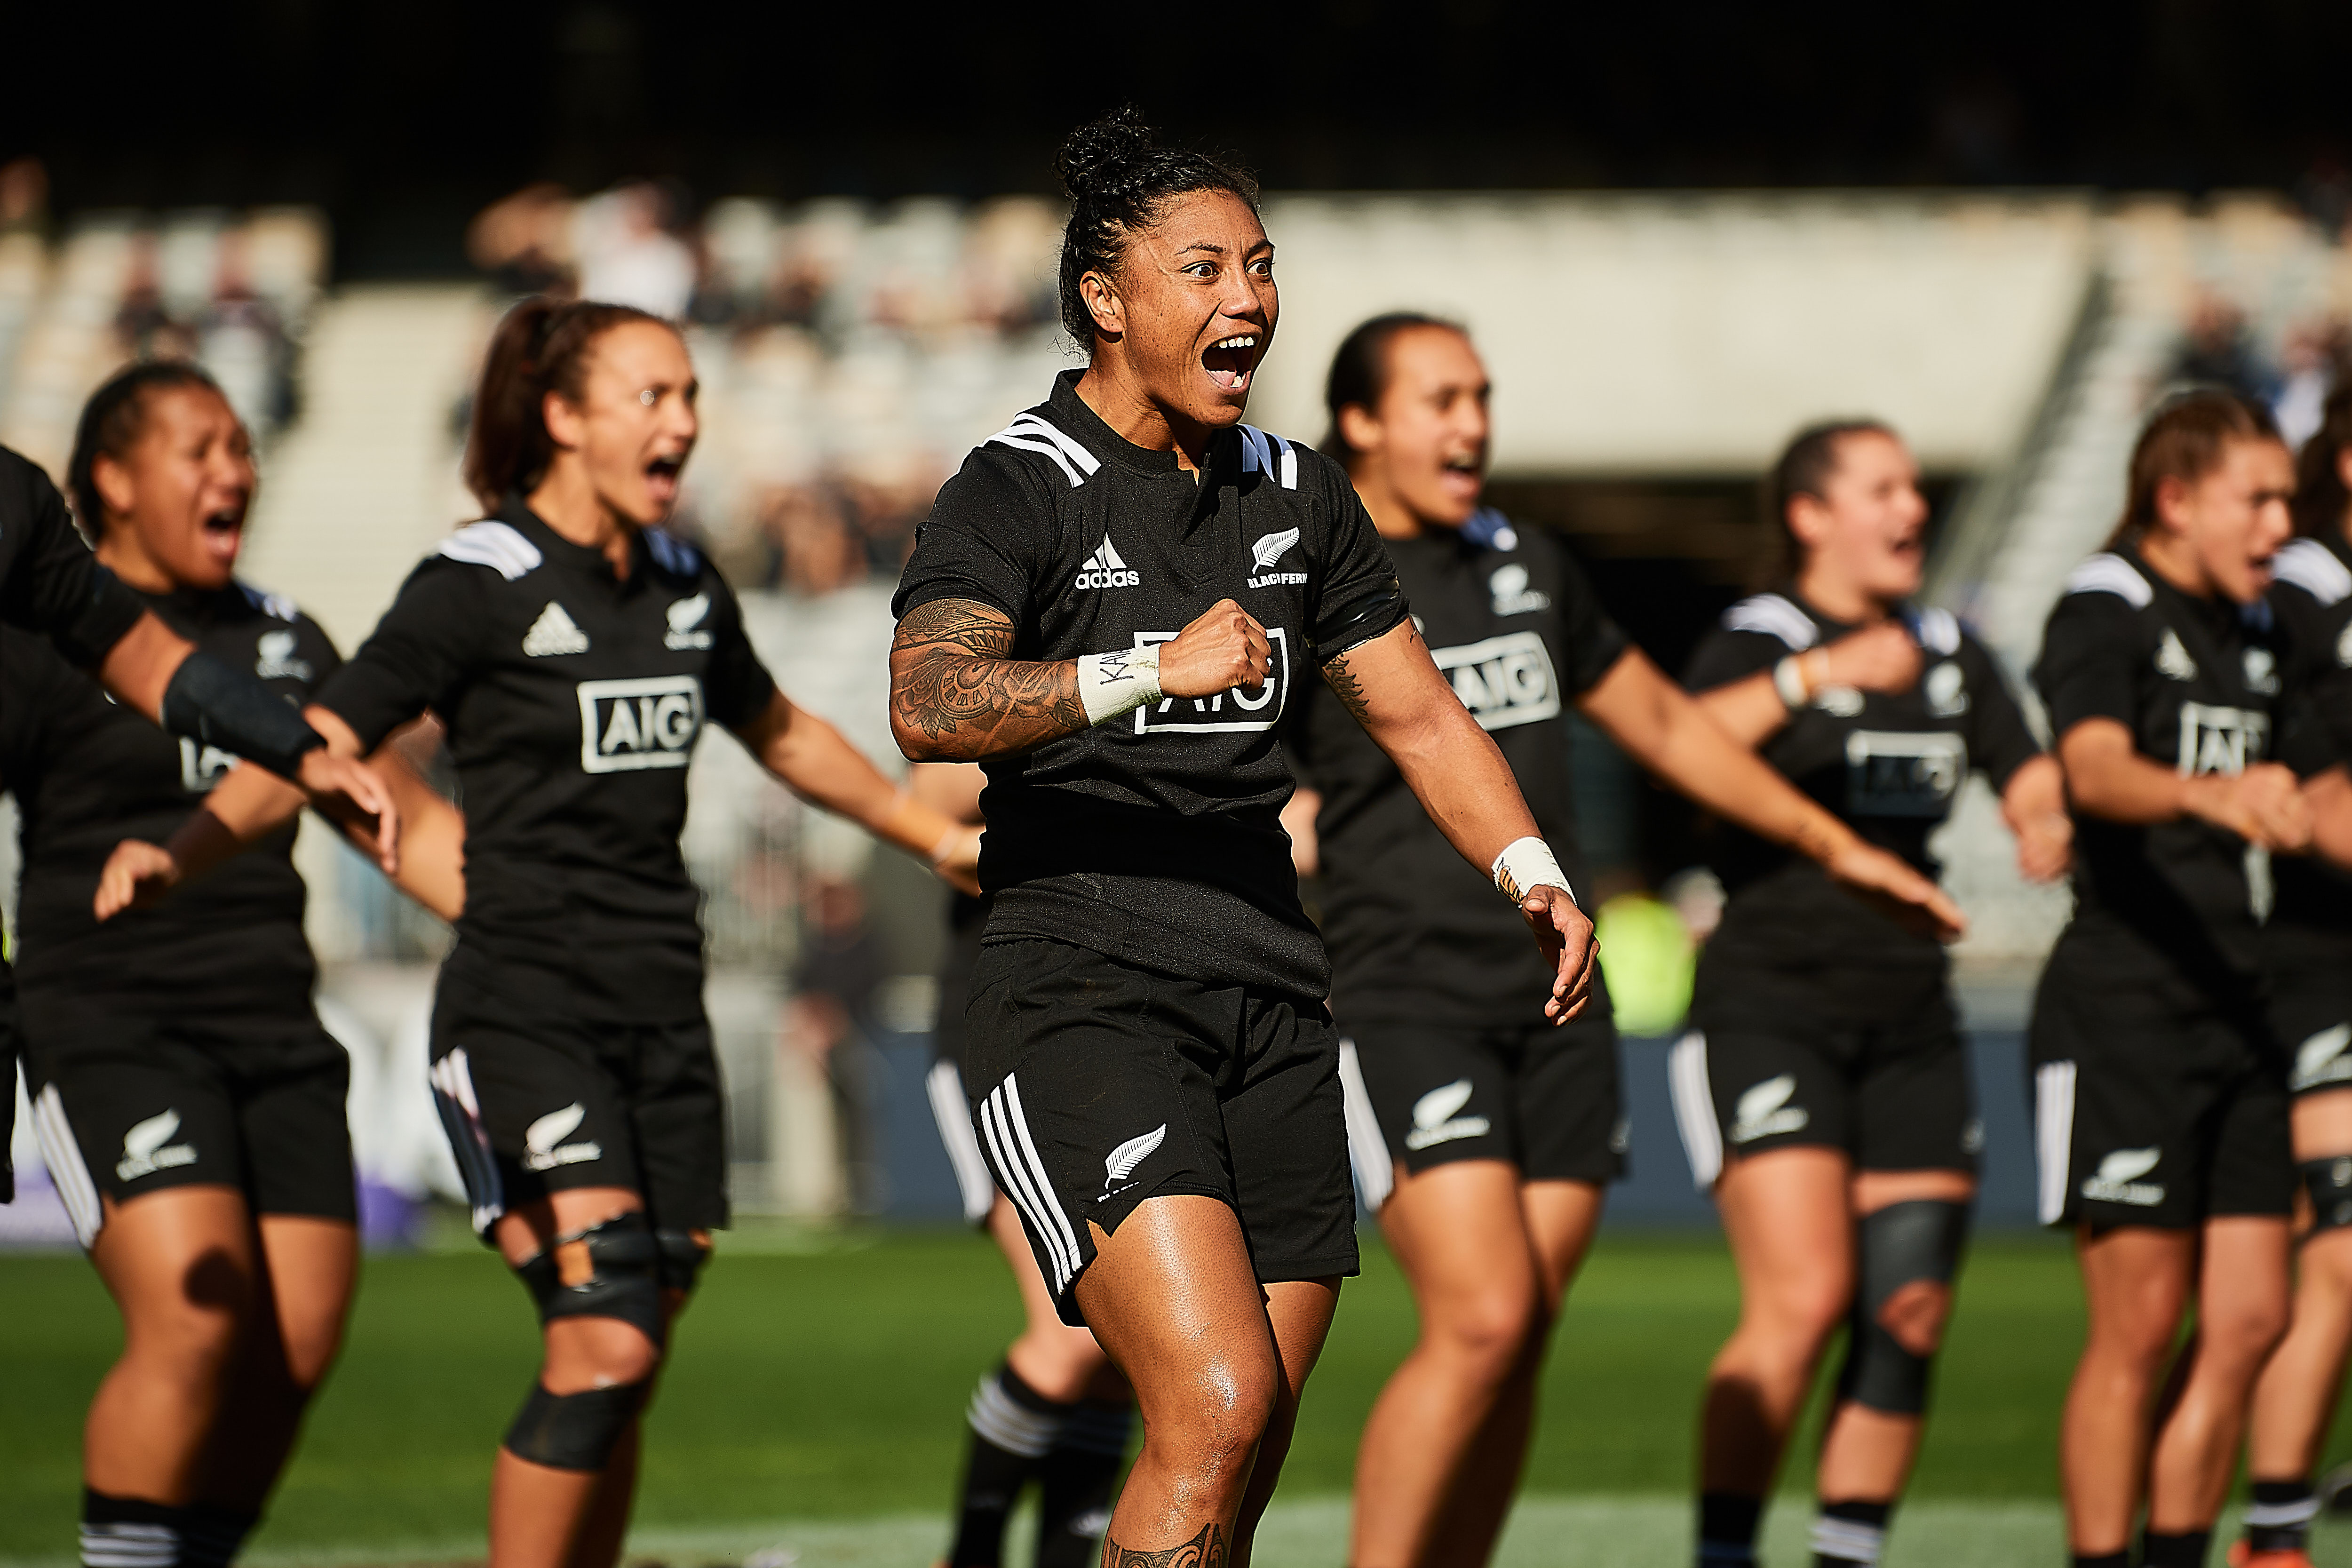 Black Ferns v Wales Kickoff time, how to watch in NZ, live streaming, teams, odds - all you need to know